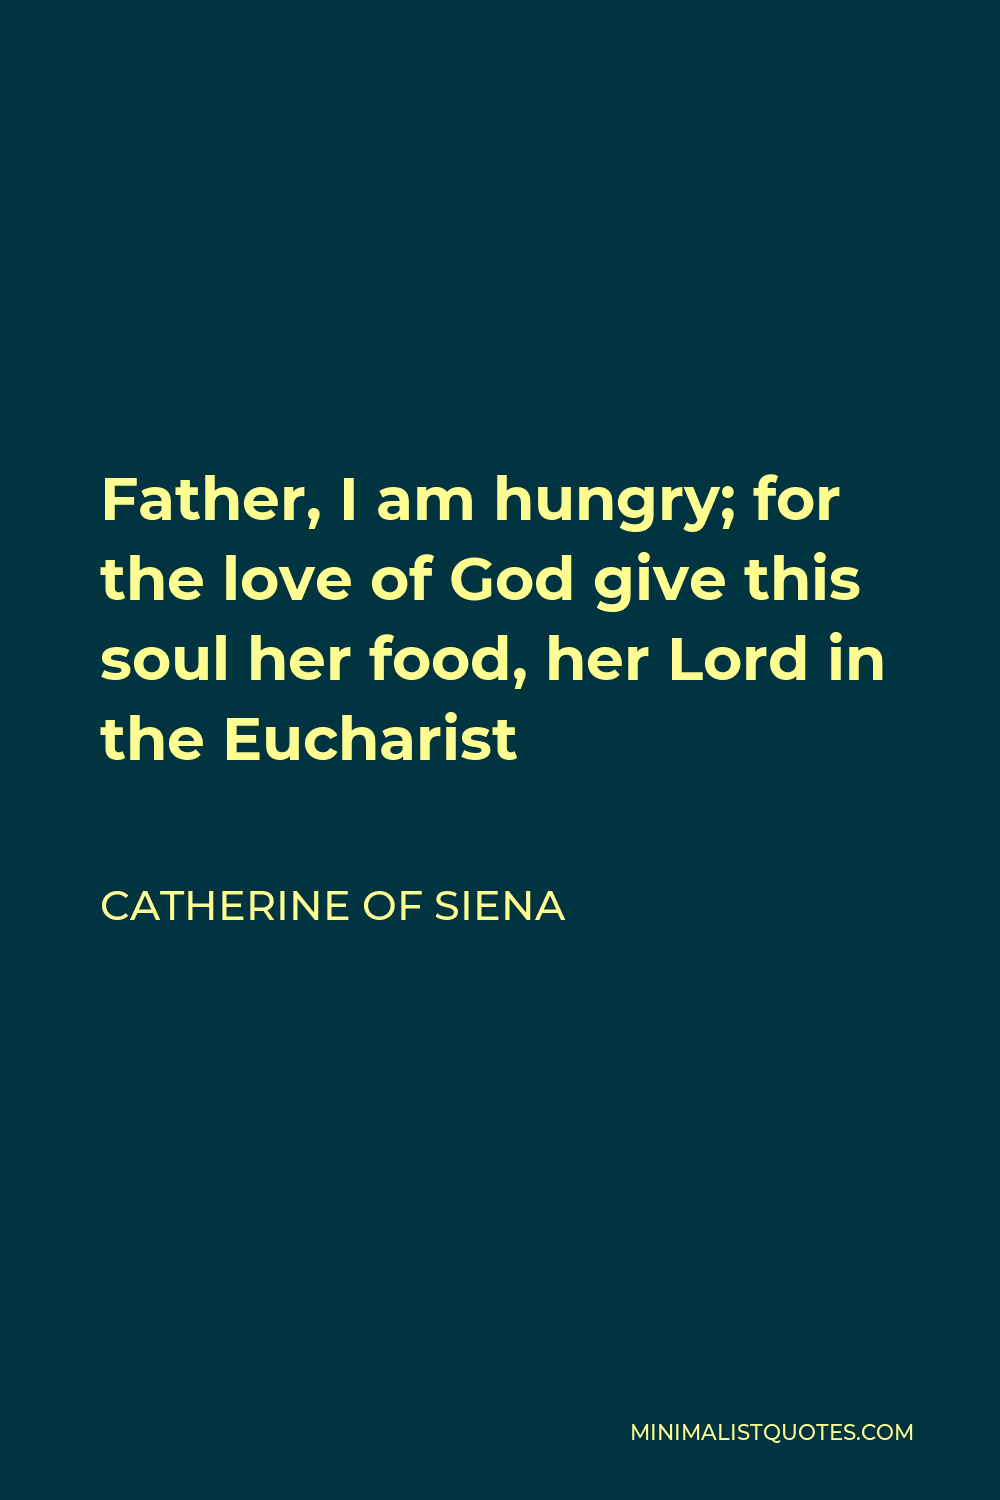 Catherine of Siena Quote - Father, I am hungry; for the love of God give this soul her food, her Lord in the Eucharist